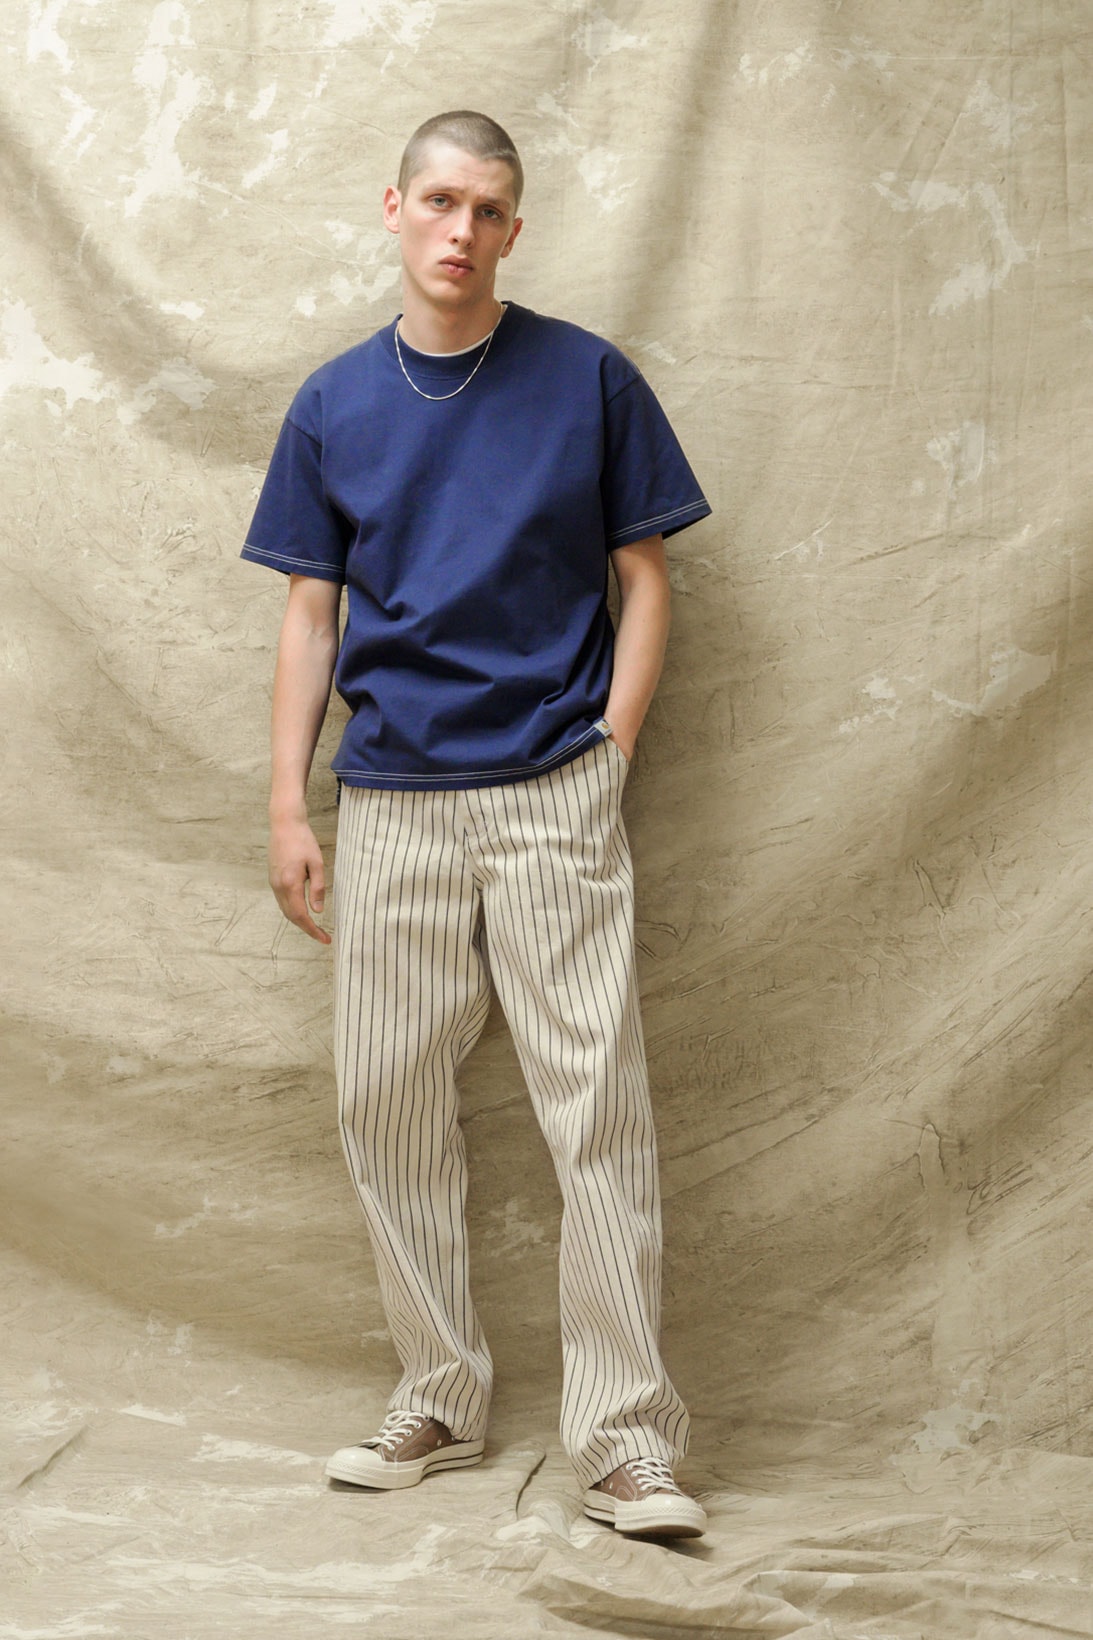 carhartt wip spring summer 2021 ss21 collection lookbook t-shirt striped trousers